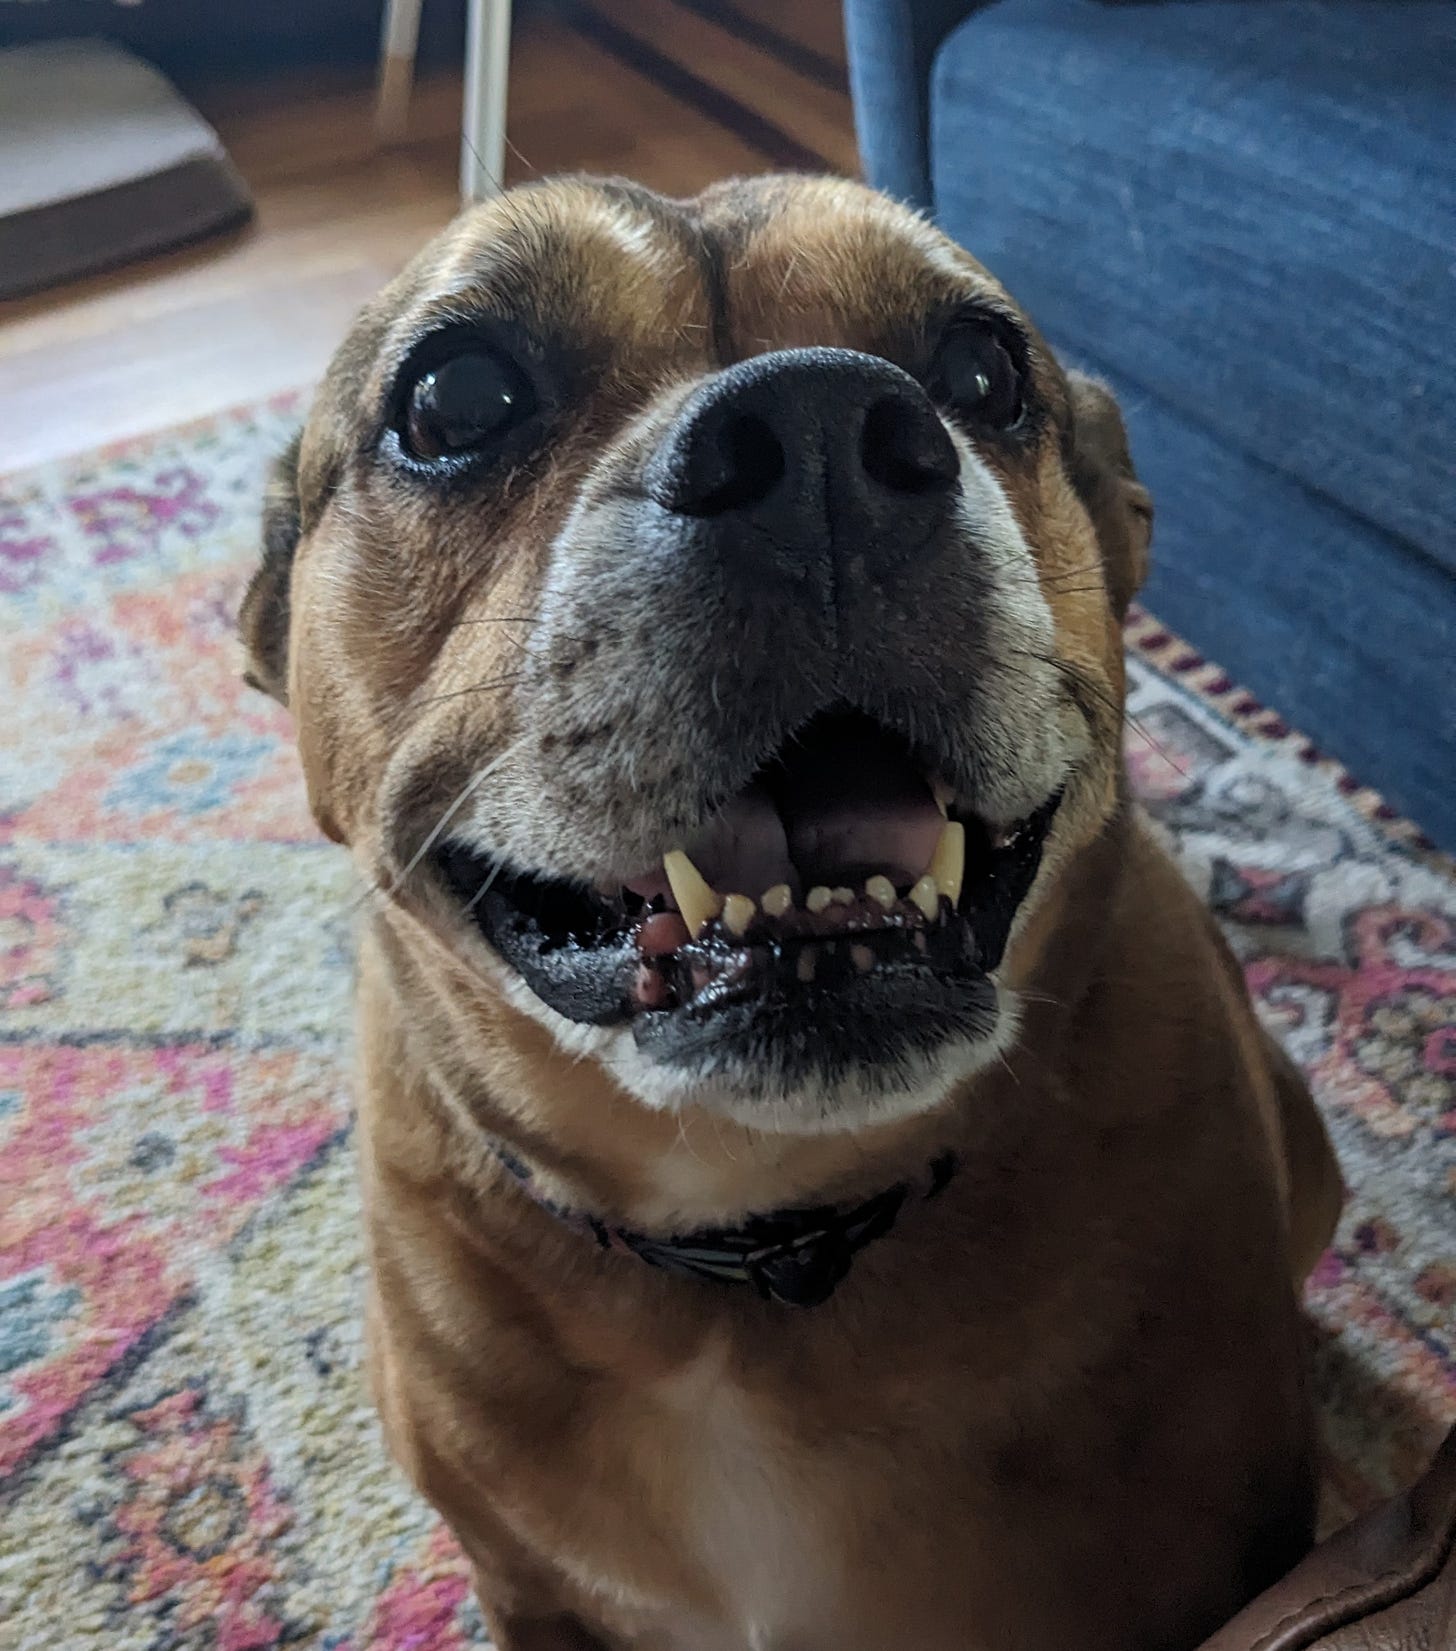 A picture of a silly brown dog smiling at the camera